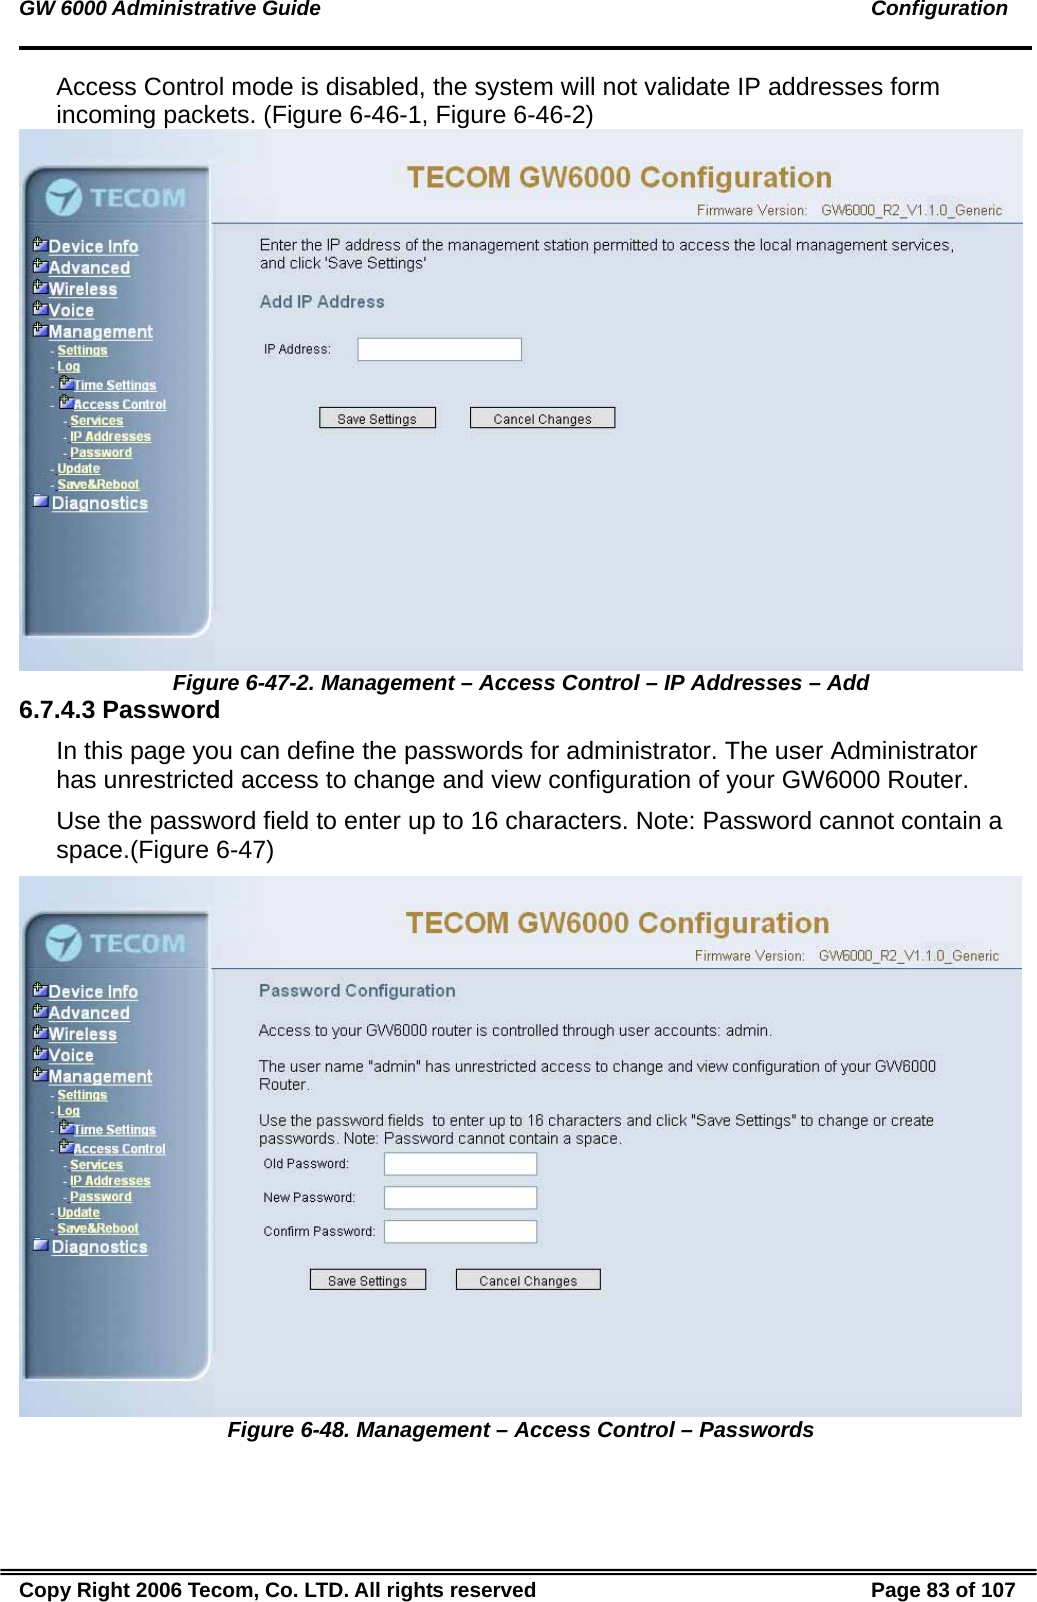 GW 6000 Administrative Guide                                                                                               Configuration Access Control mode is disabled, the system will not validate IP addresses form incoming packets. (Figure 6-46-1, Figure 6-46-2)  Figure 6-47-2. Management – Access Control – IP Addresses – Add 6.7.4.3 Password In this page you can define the passwords for administrator. The user Administrator has unrestricted access to change and view configuration of your GW6000 Router. Use the password field to enter up to 16 characters. Note: Password cannot contain a space.(Figure 6-47)  Figure 6-48. Management – Access Control – Passwords Copy Right 2006 Tecom, Co. LTD. All rights reserved  Page 83 of 107 